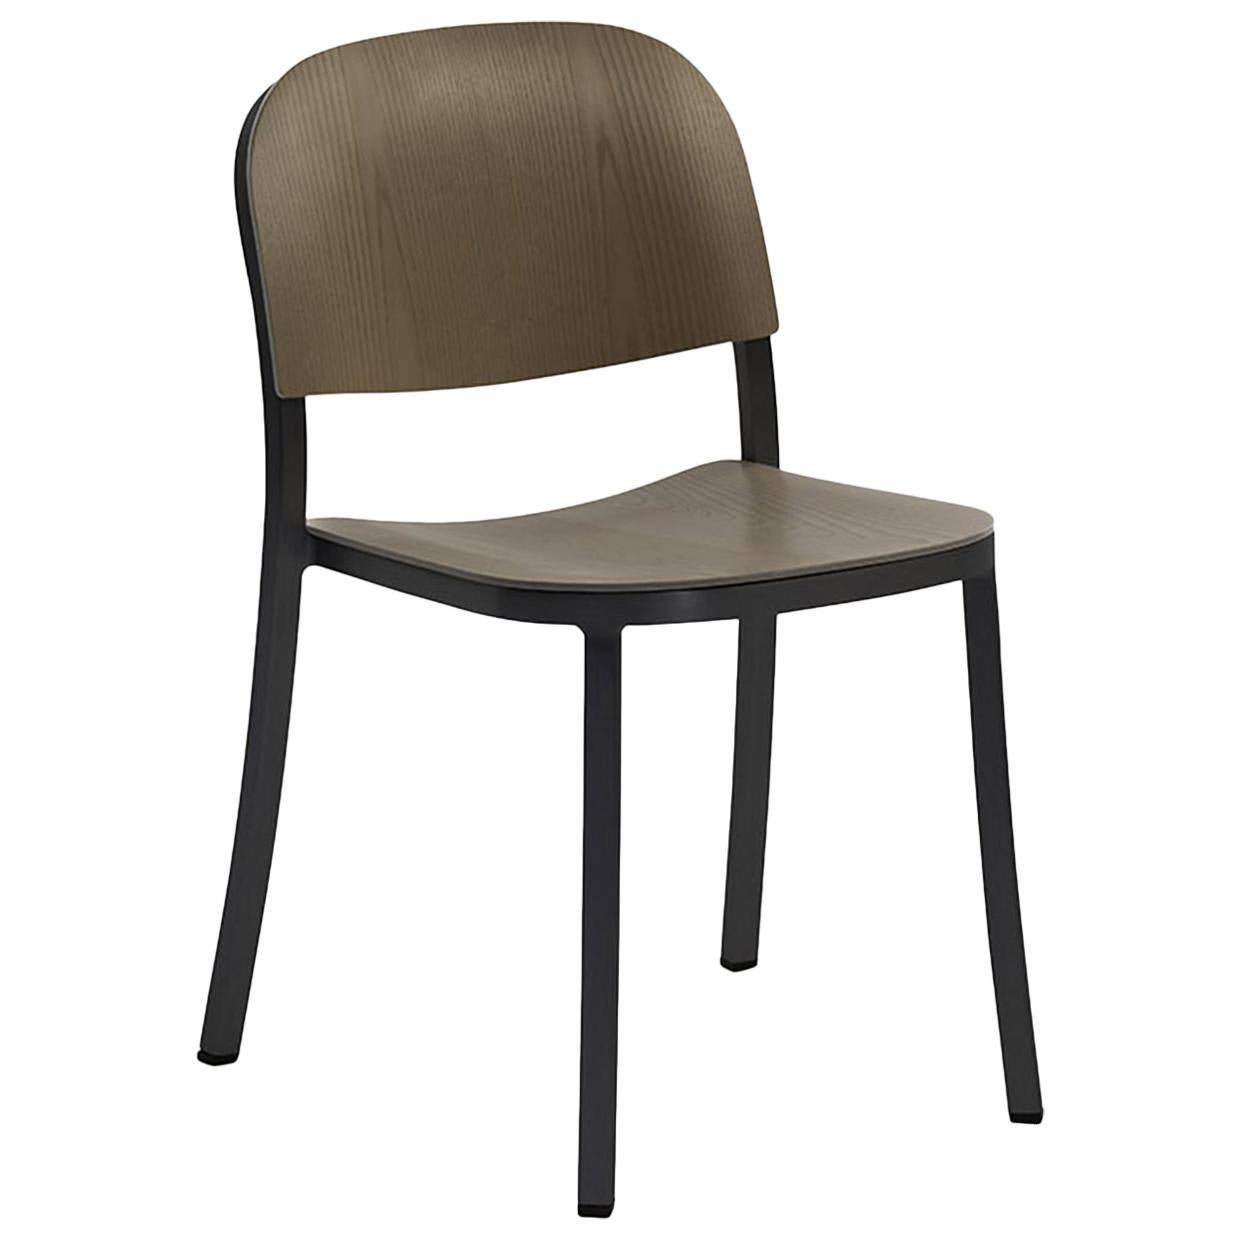 Emeco 1 Inch Stacking Chair in Dark Aluminum and Walnut by Jasper Morrison For Sale